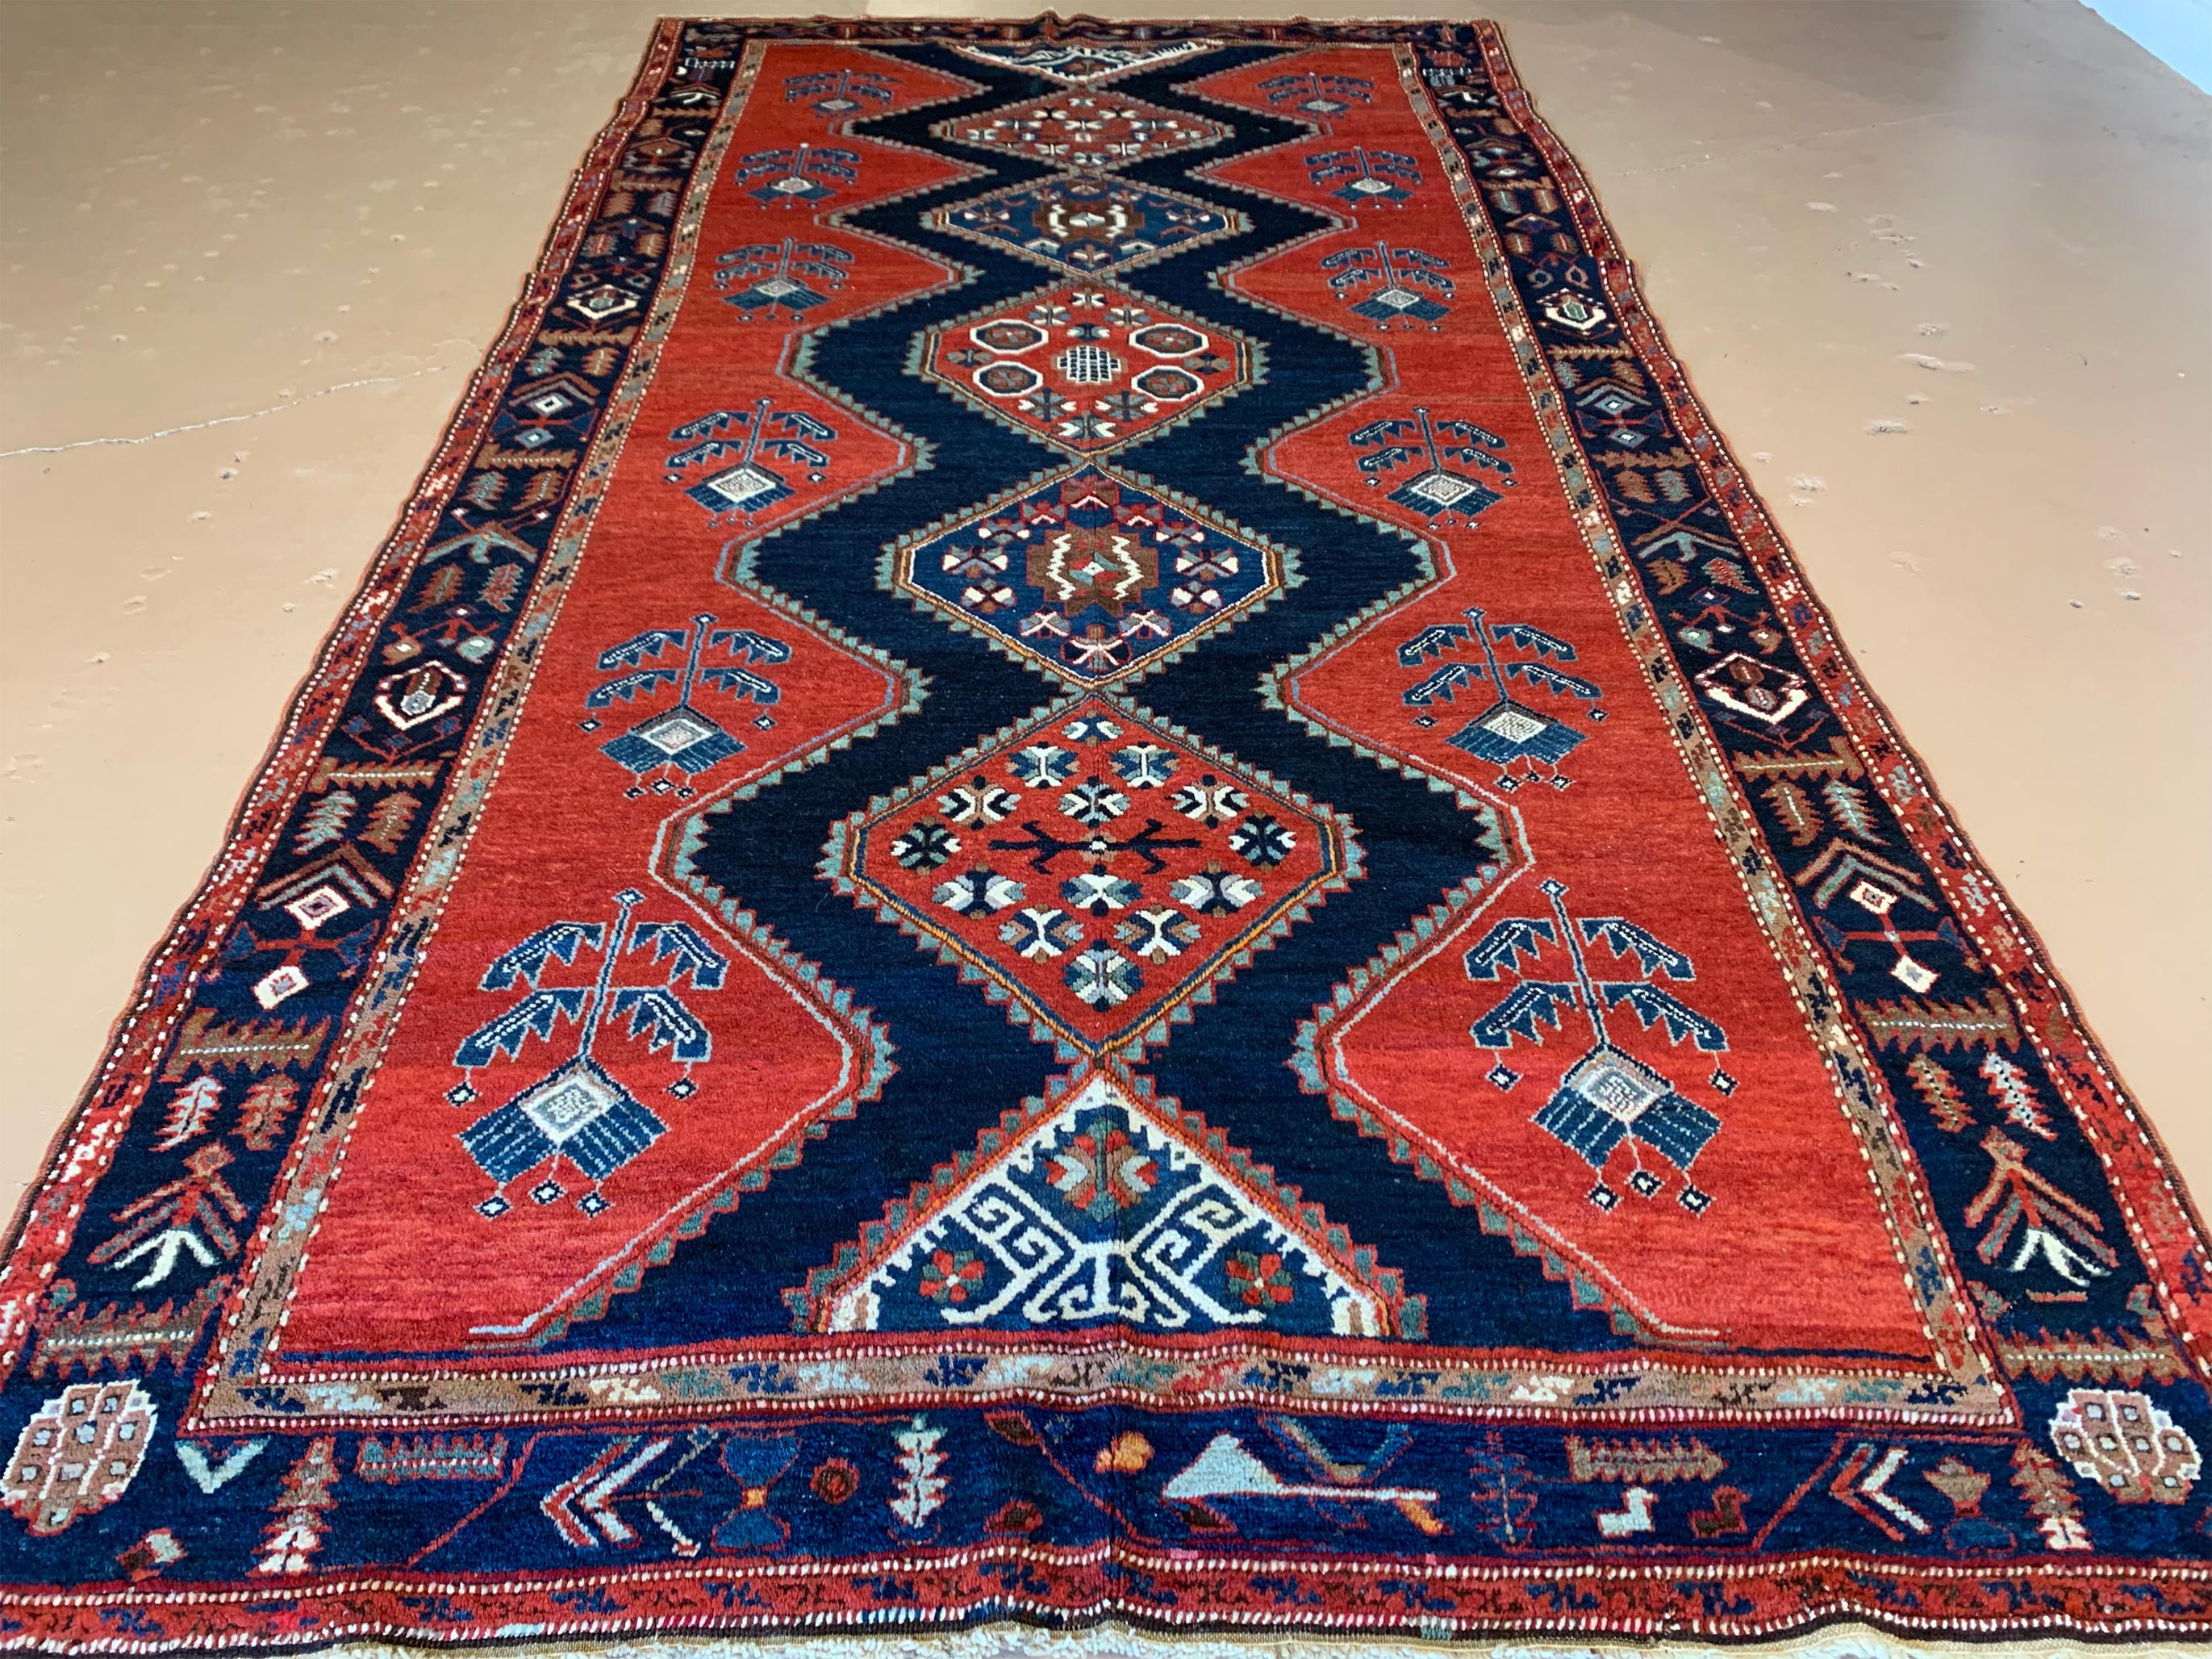 This is an antique hand-knotted Eagle Kazak rug, made in Caucasia in the late 1800s. It is wool pile on wool warp and weft, with all vegetable dyes and is approximately 6’3 x 12’ ft. This is a rare size, as these are usually much shorter.

Bold